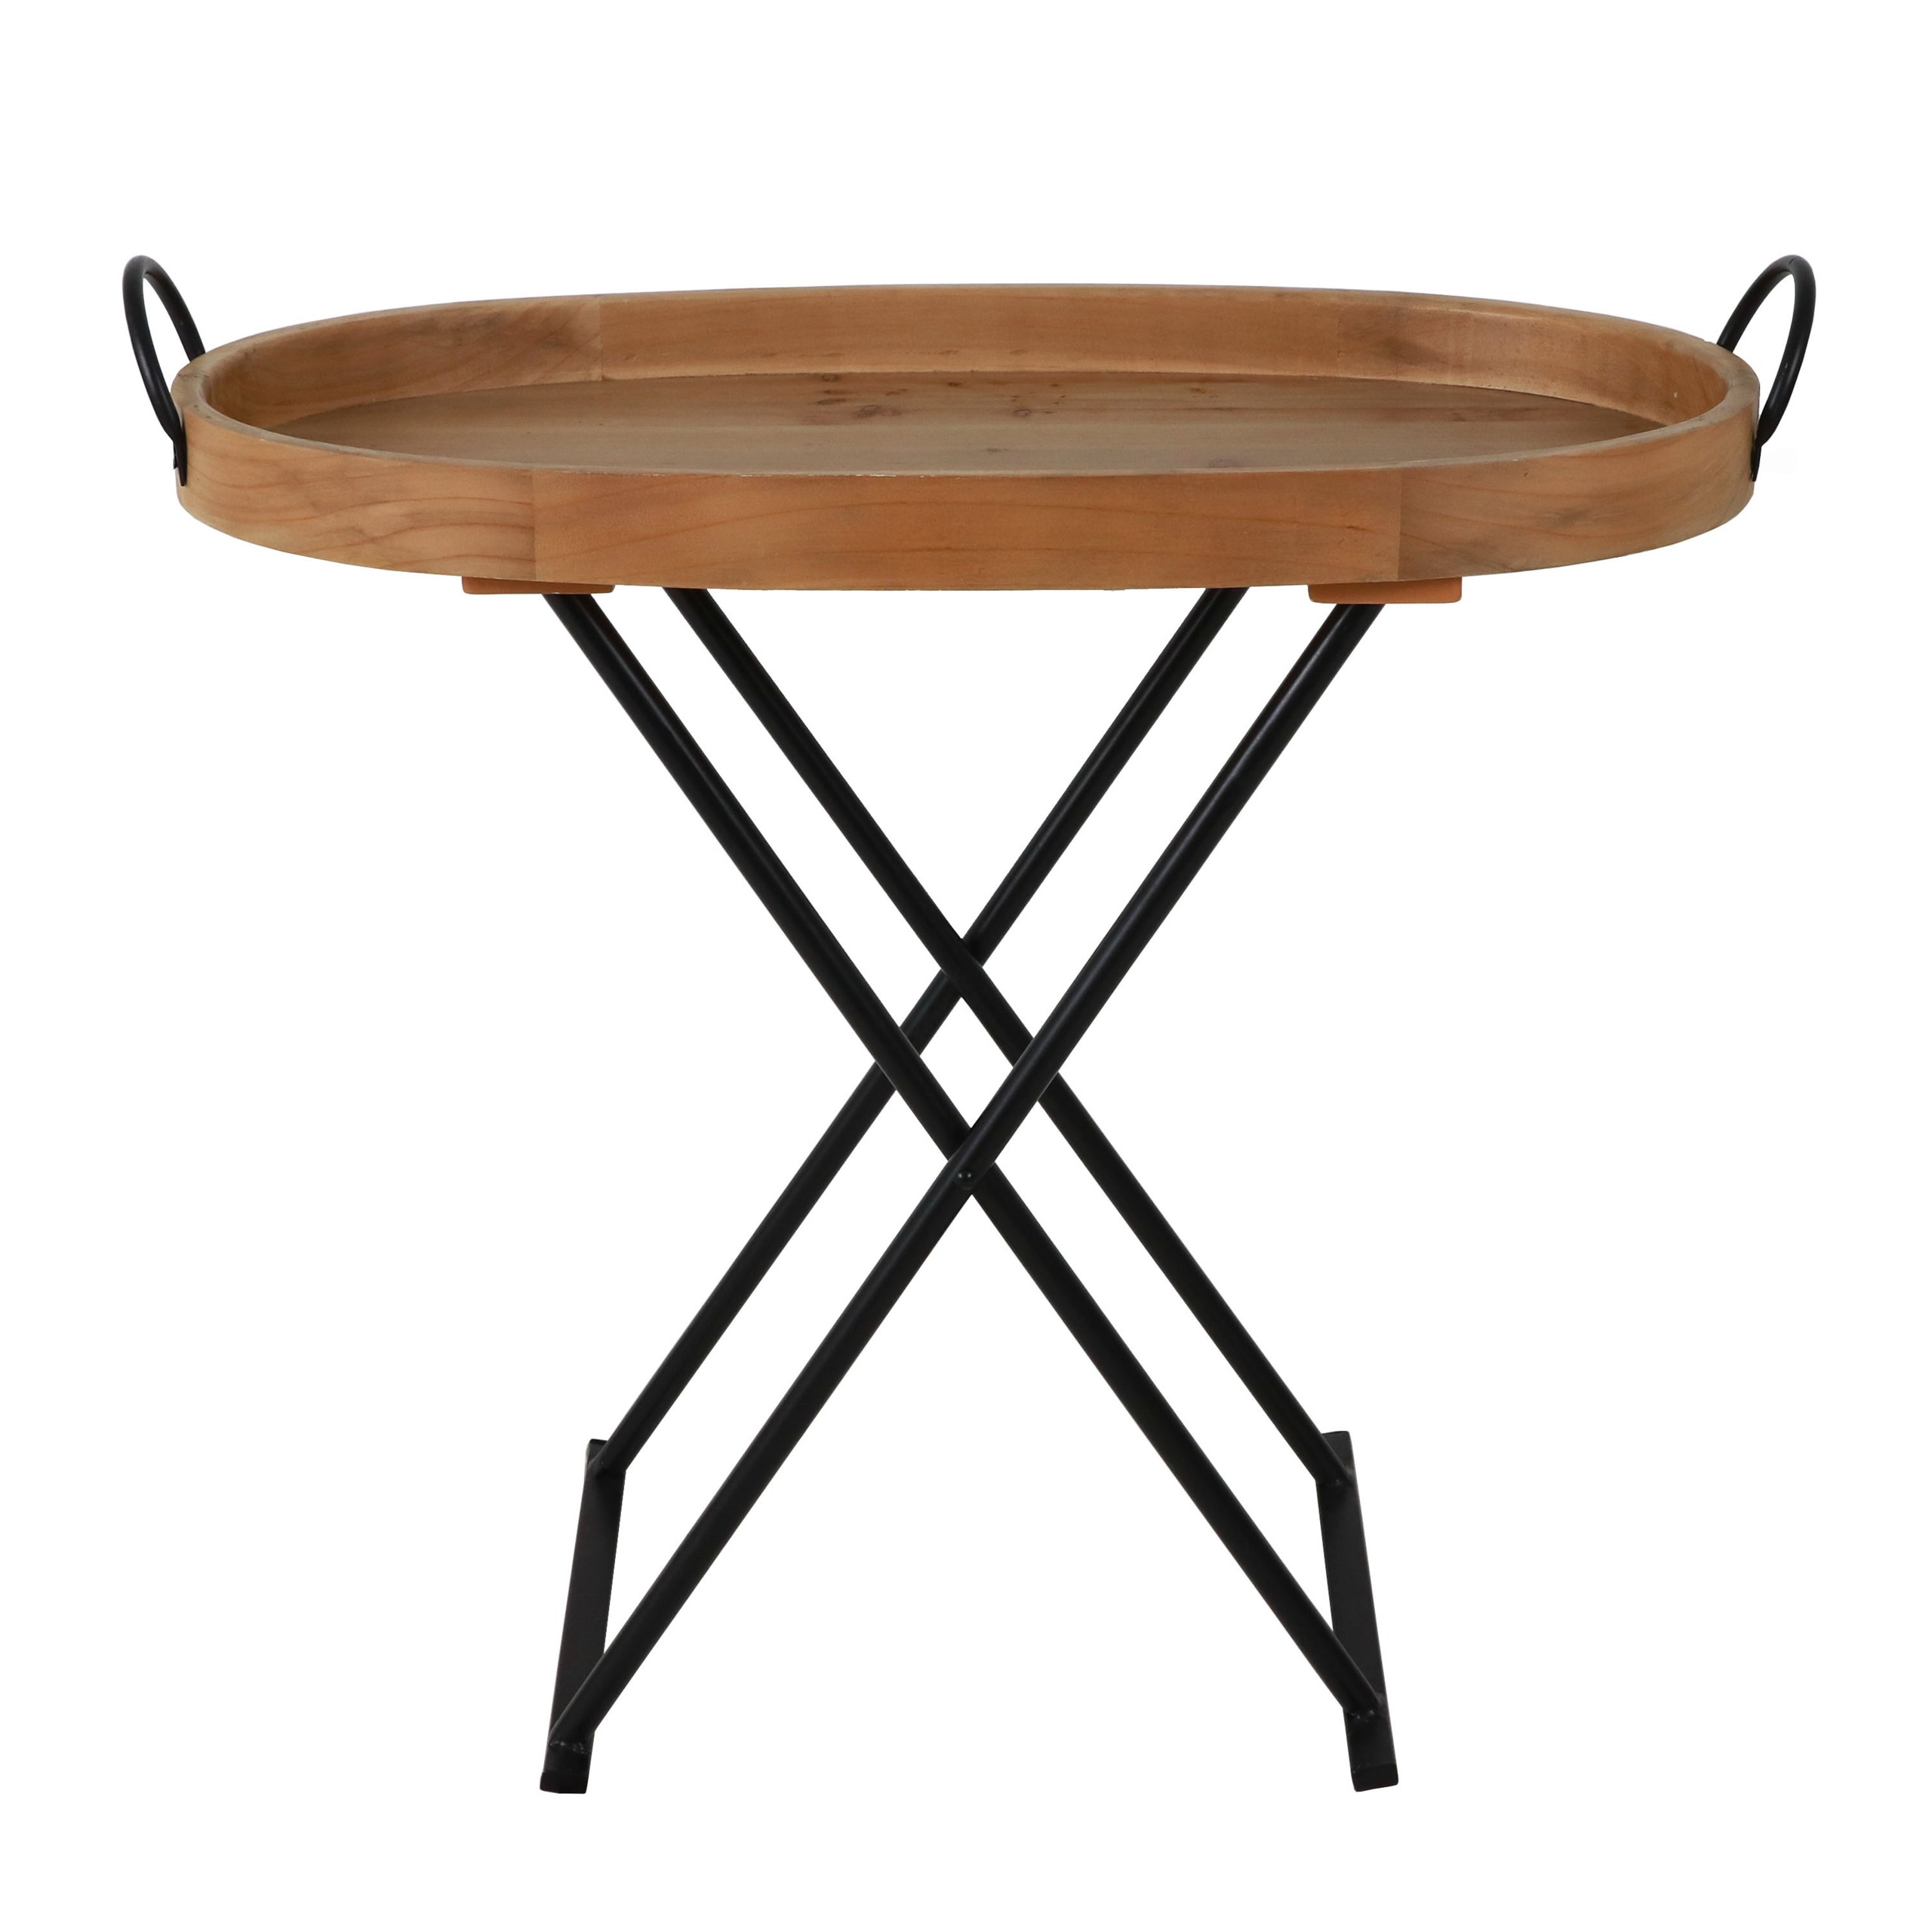 Daphne oval wood tray top folding table